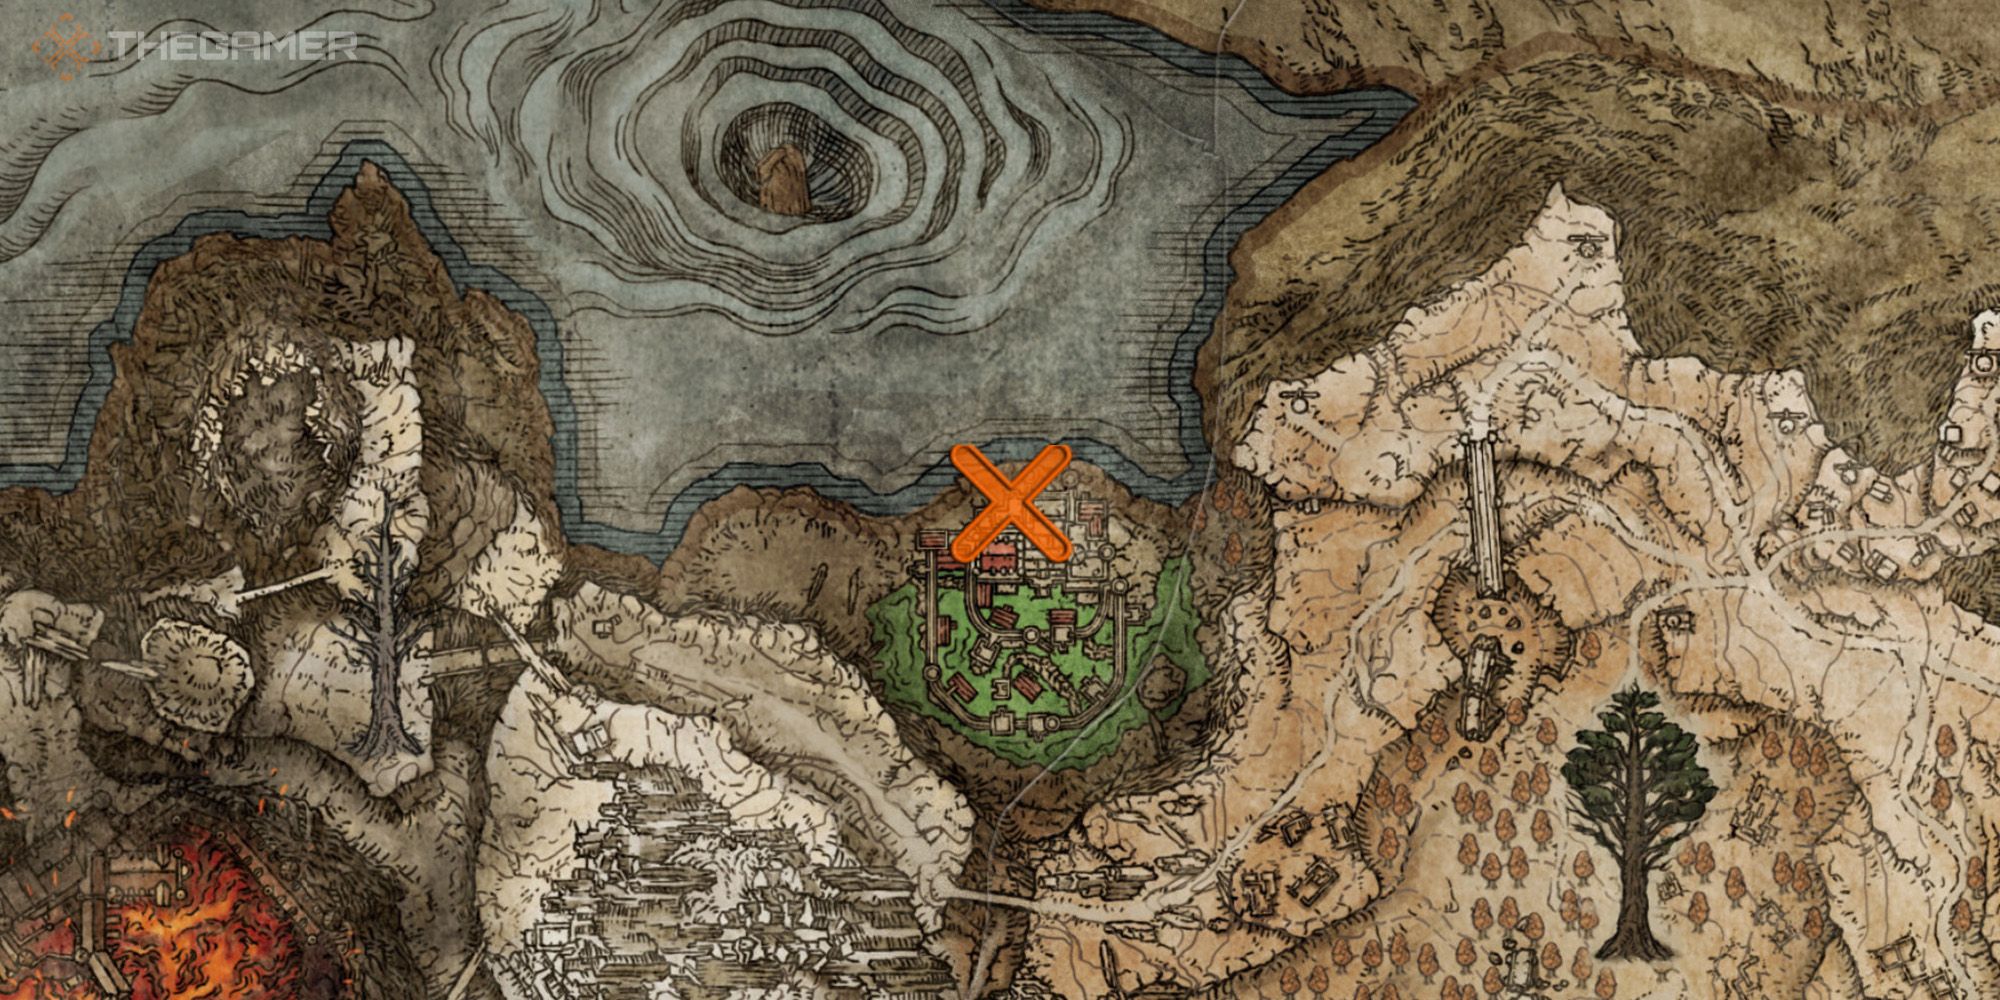 Elden Ring Map showing the location of Perfumer's Cookbook [2]